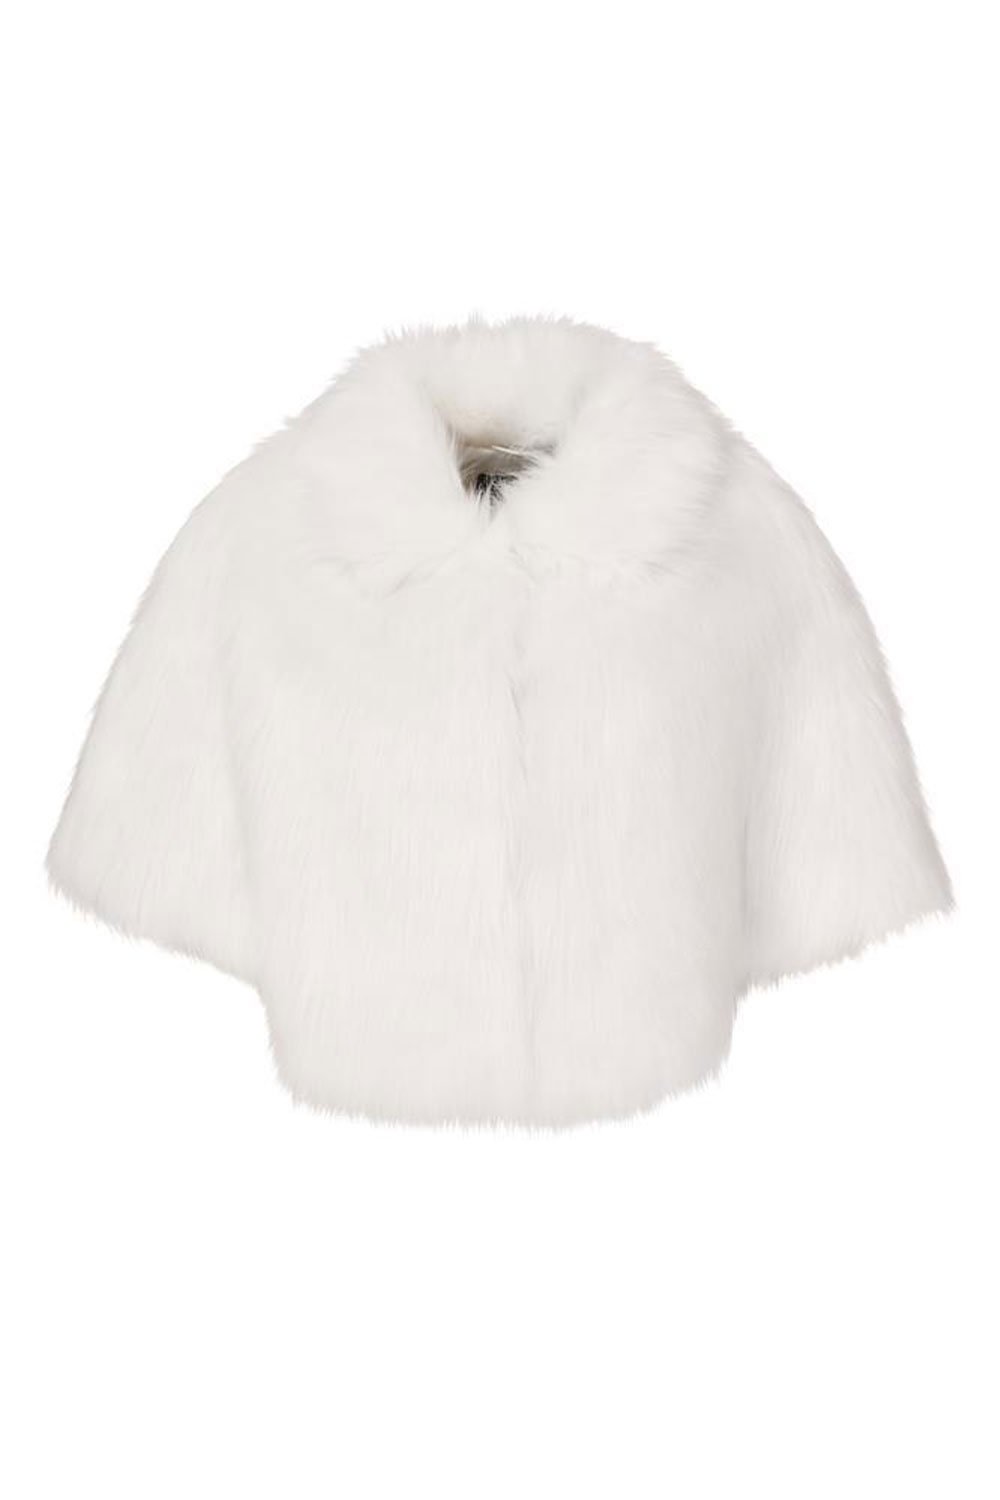 Unreal Fur Nord Cape in Ivory